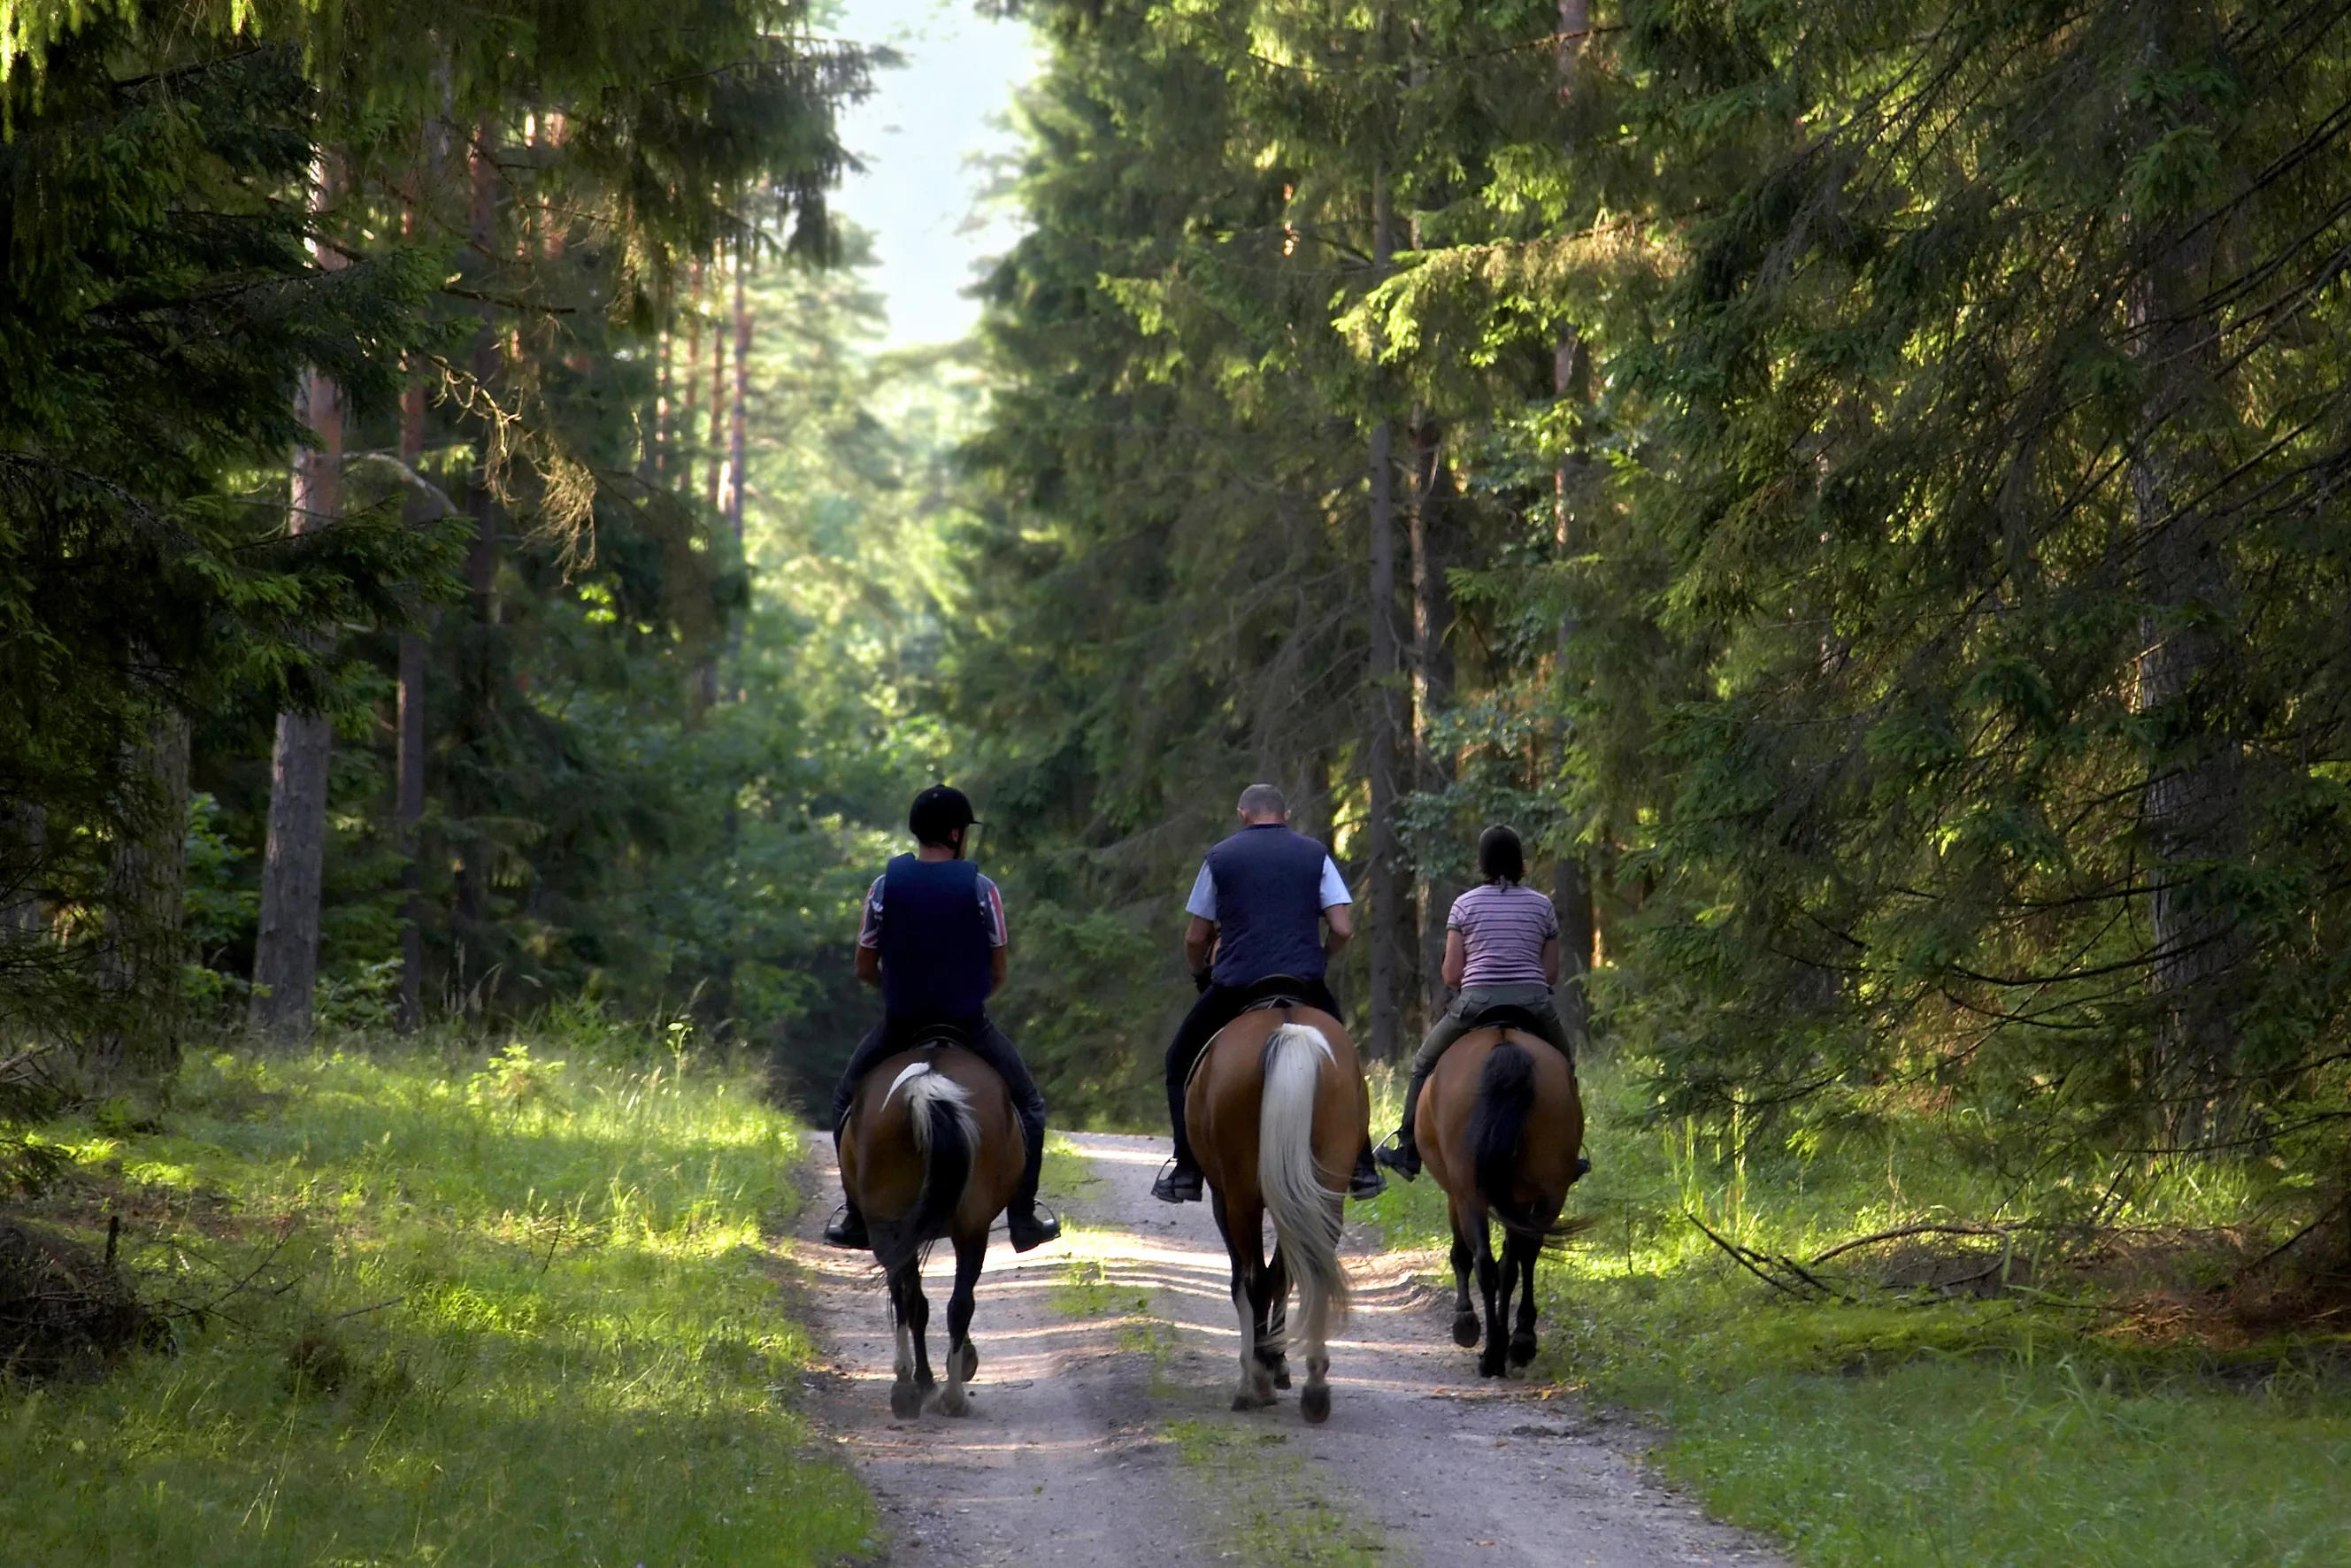 People on horseback riding away down a trail into a forest